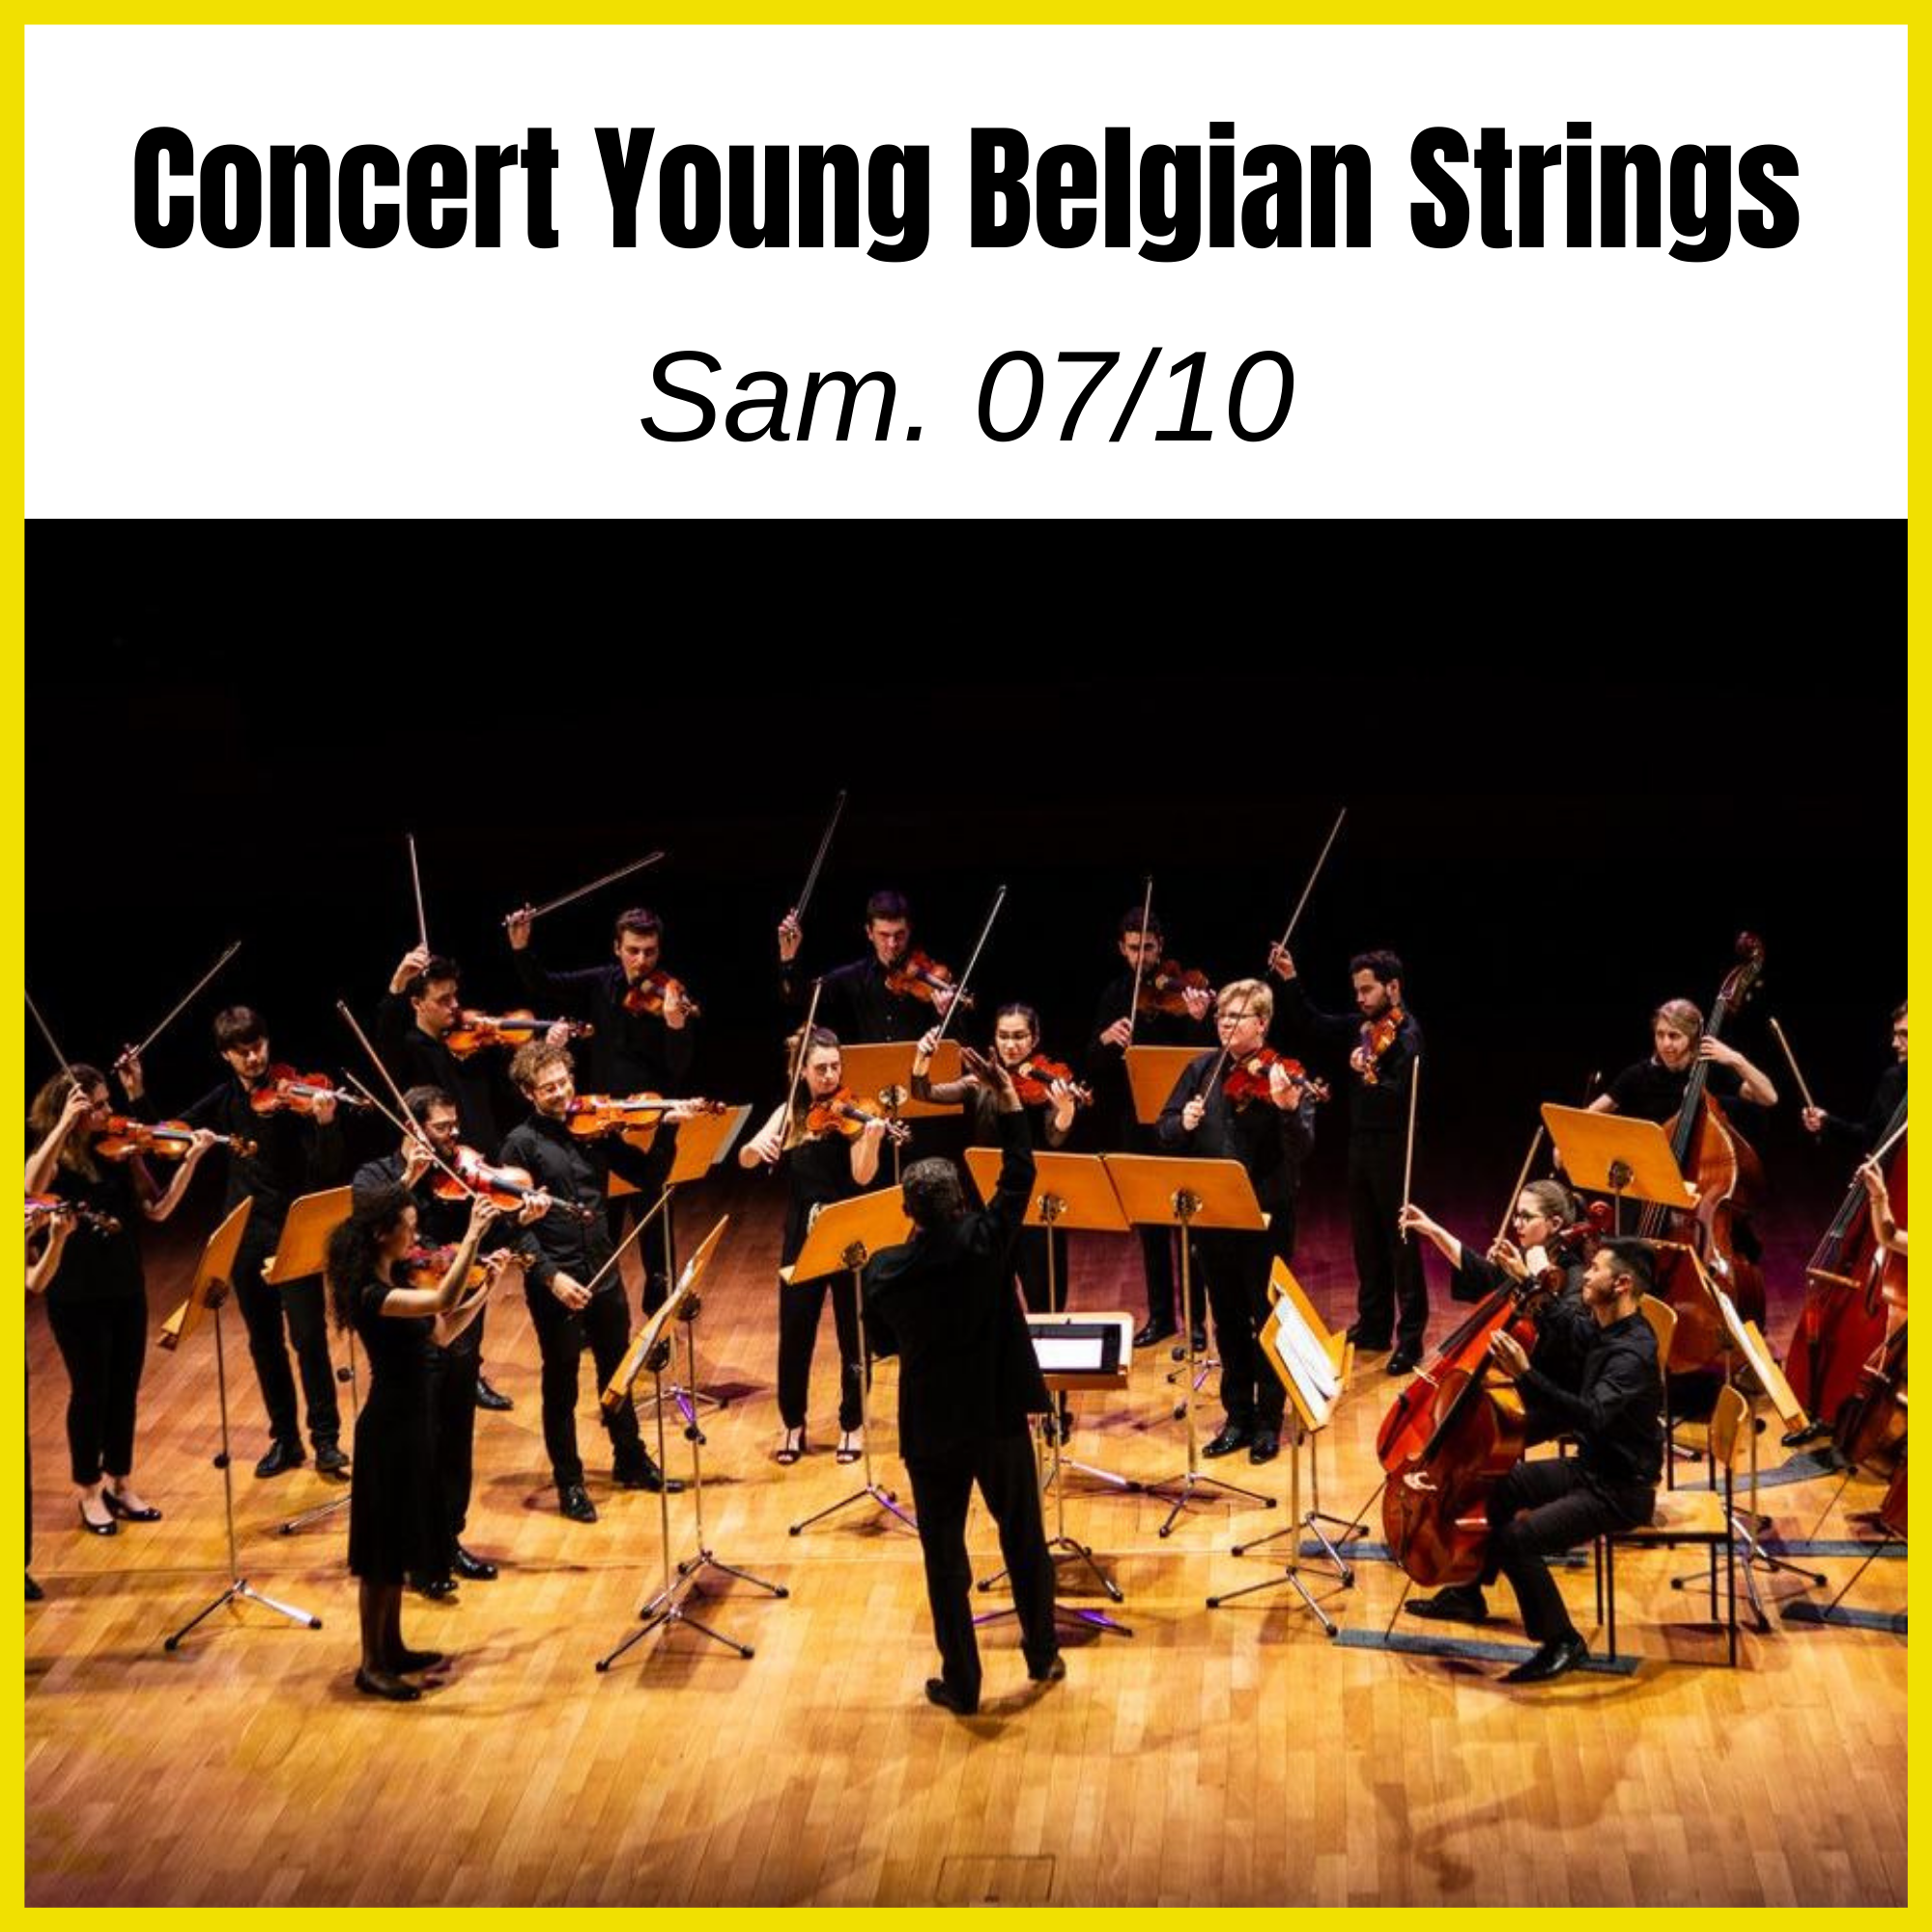 image Confrence_Eric_Sadin_1.png (2.6MB)
Lien vers: https://www.semainesansecran.be/?ConcertYoungBelgianStrings/iframe